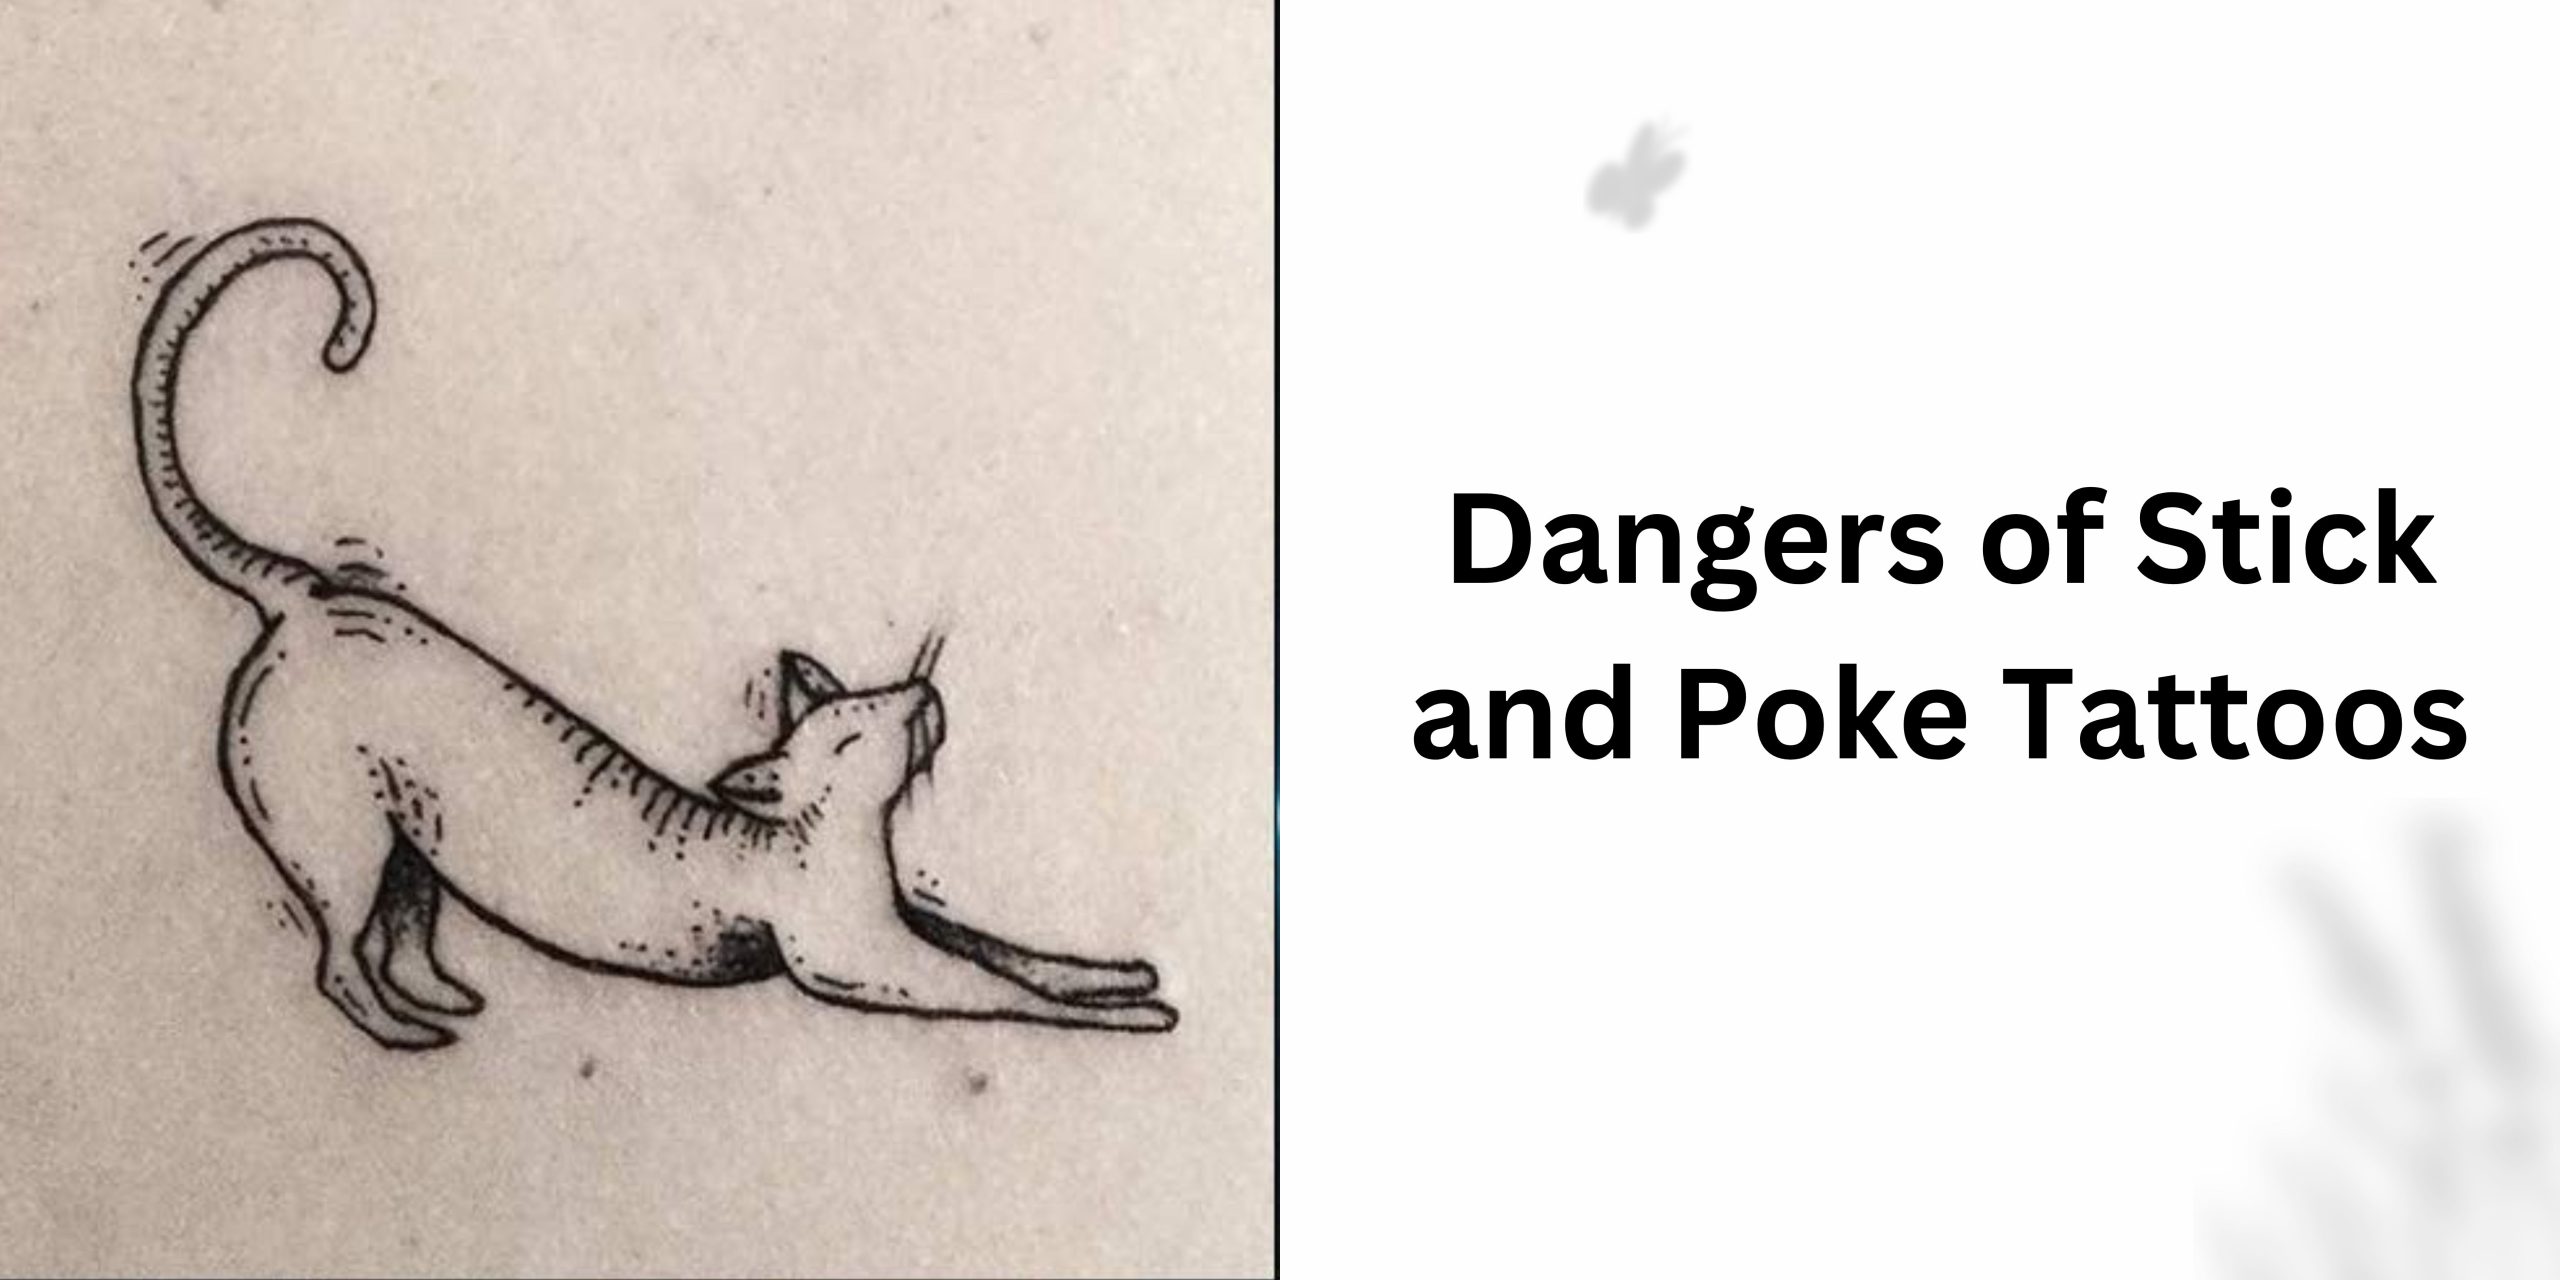 Dangers of Stick and Poke Tattoos